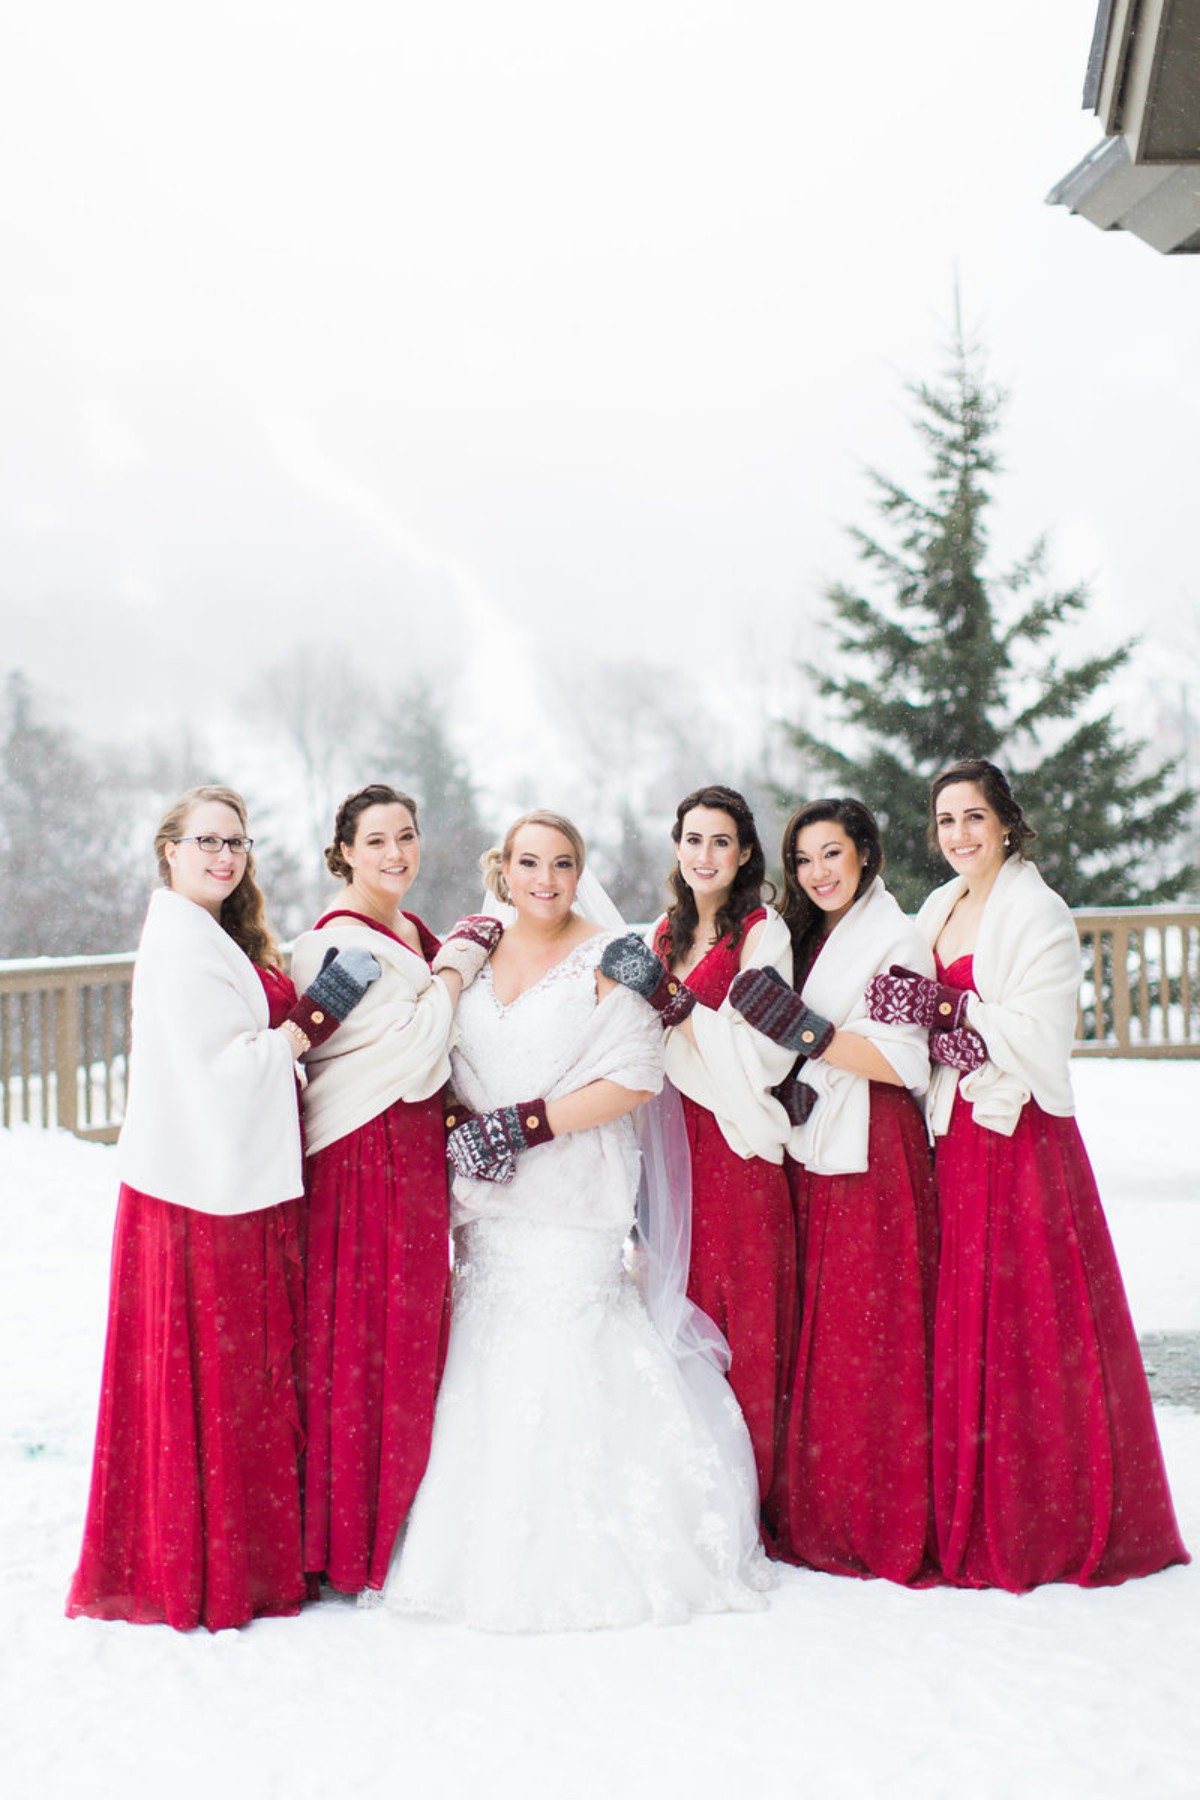 Winter bridesmaids with mittens